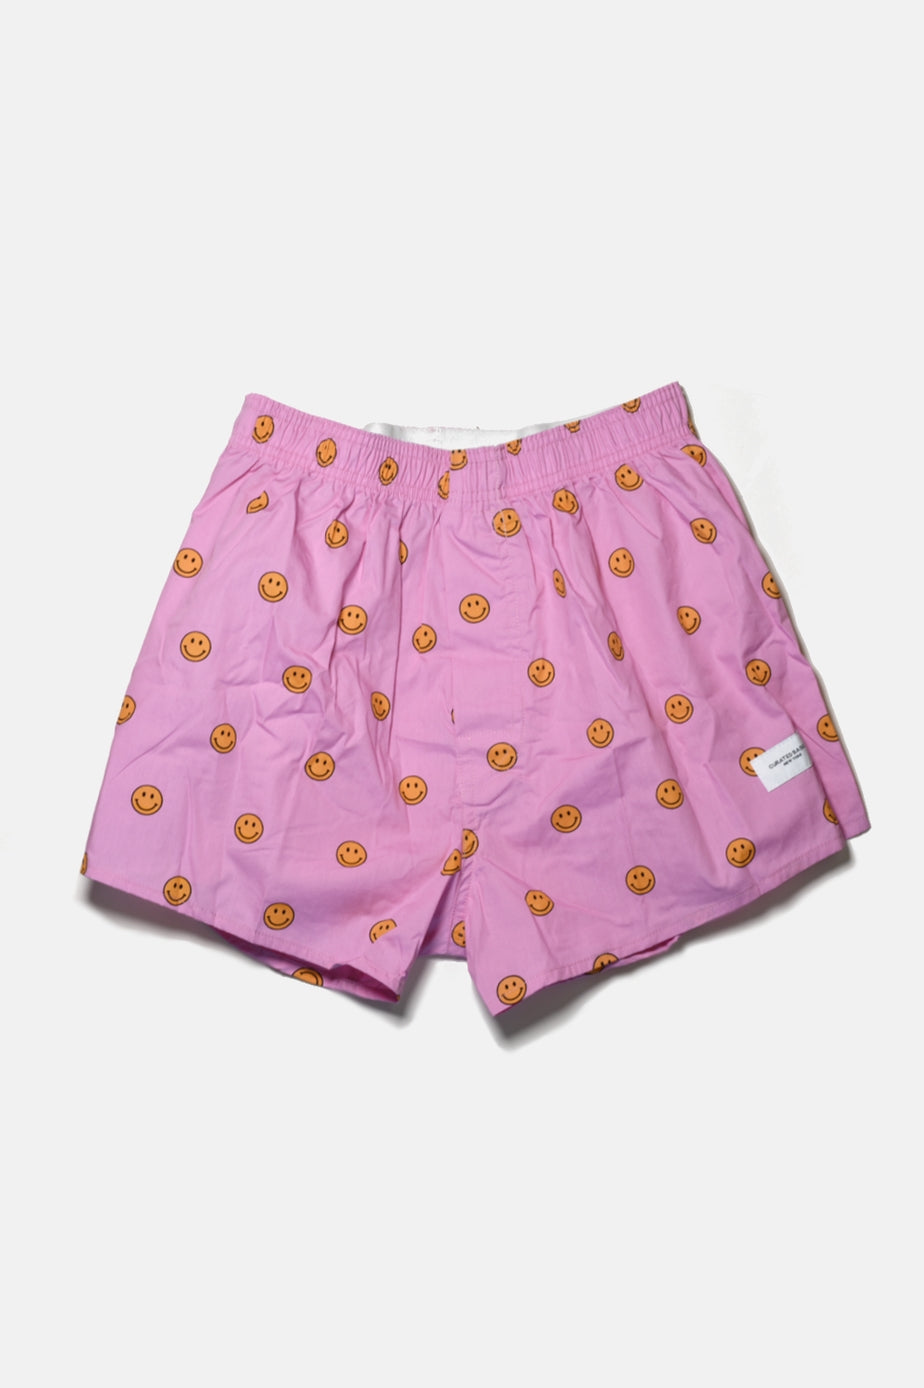 Smiley Face Boxers - PINK – Vado Clothing Co.